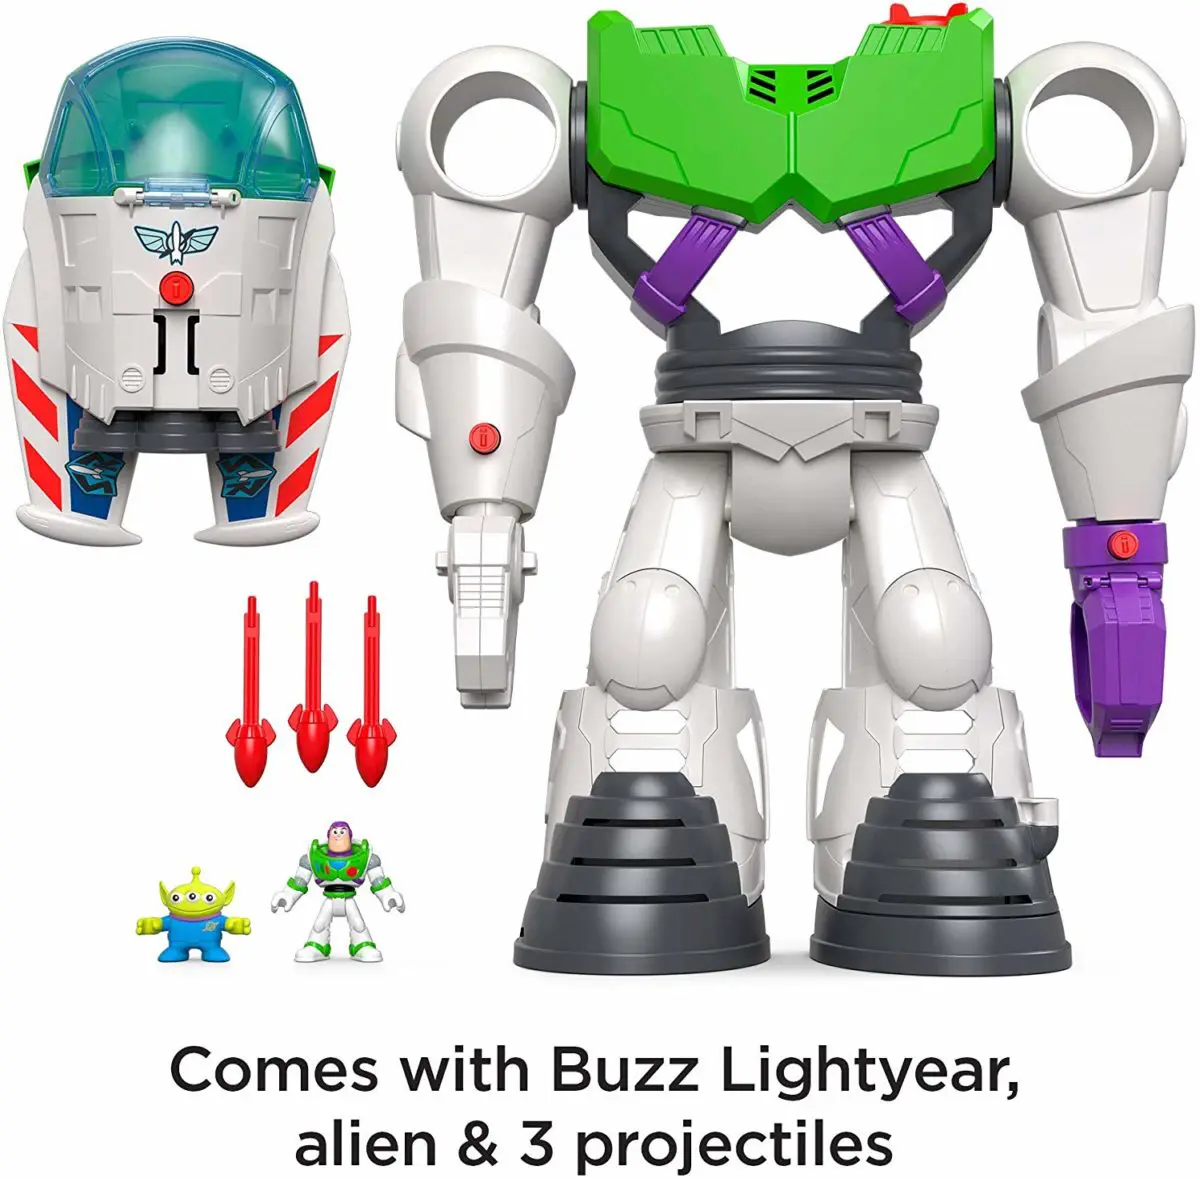 Toy Story Fisher-Price Imaginext 4 Buzz Lightyear Robot - Top Toys and Gifts for Four Year Old Boys 2